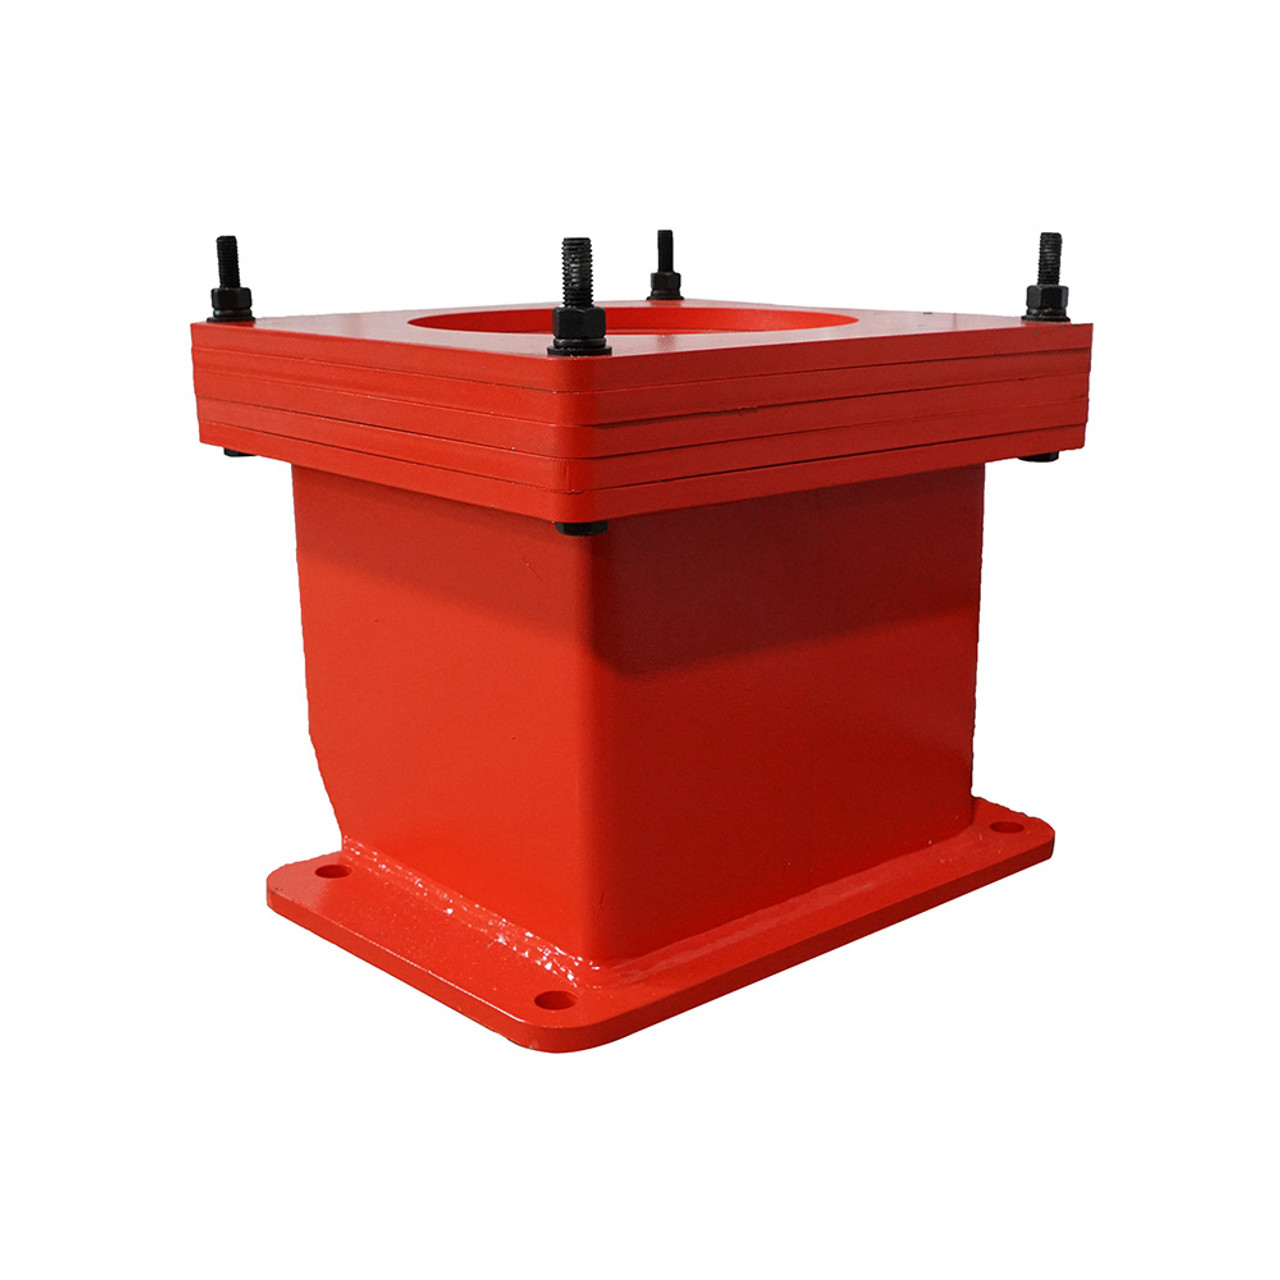 Cyclone Shaker And Pedestal Combination - Dedoes